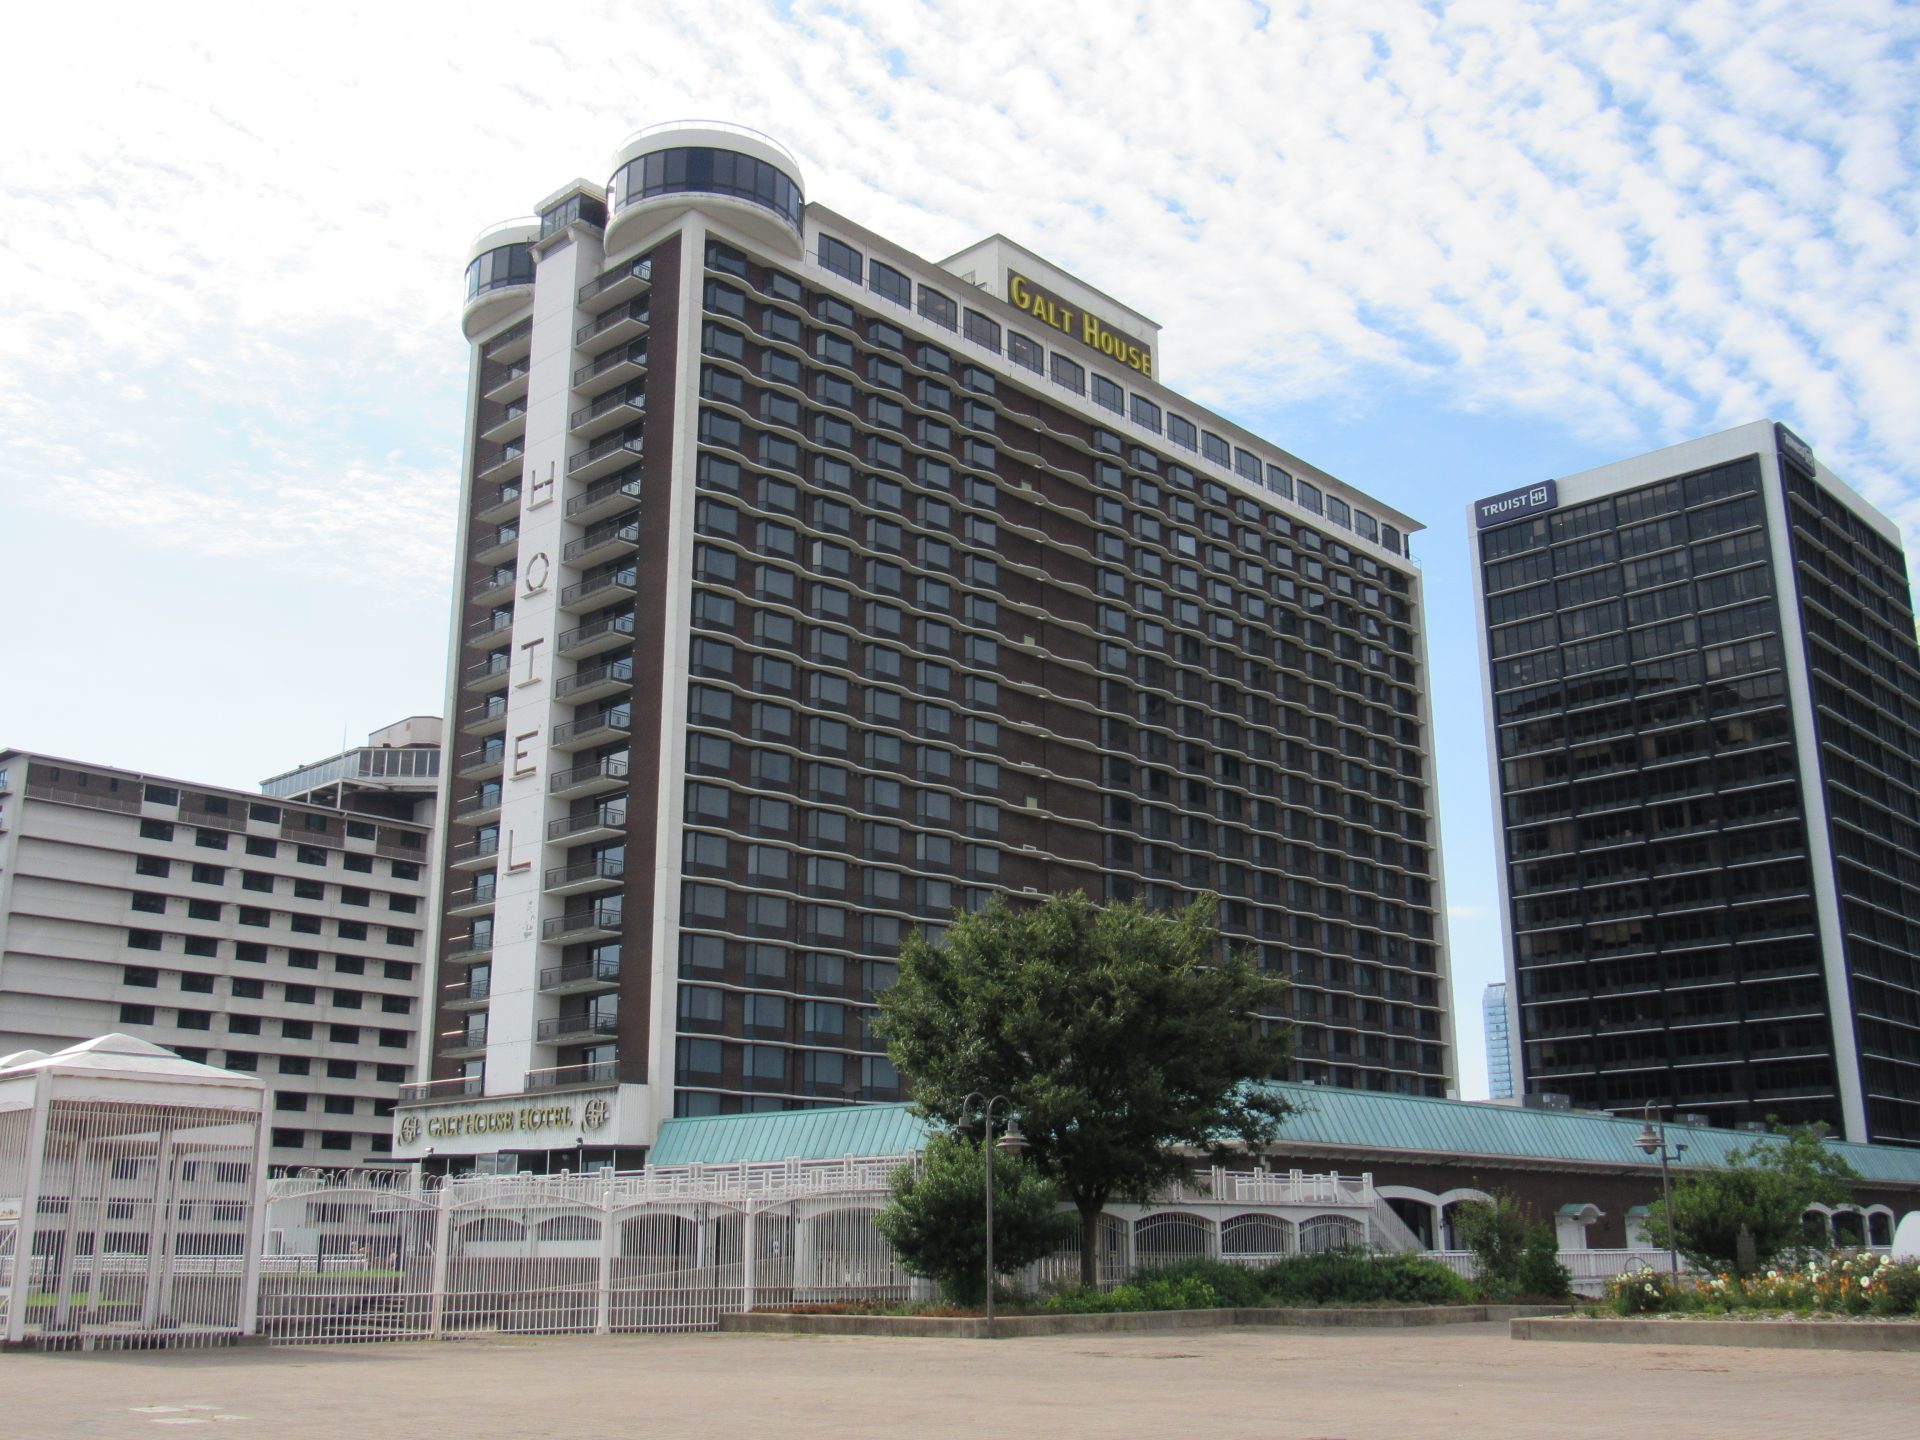 The Galt House Hotel & Suites image